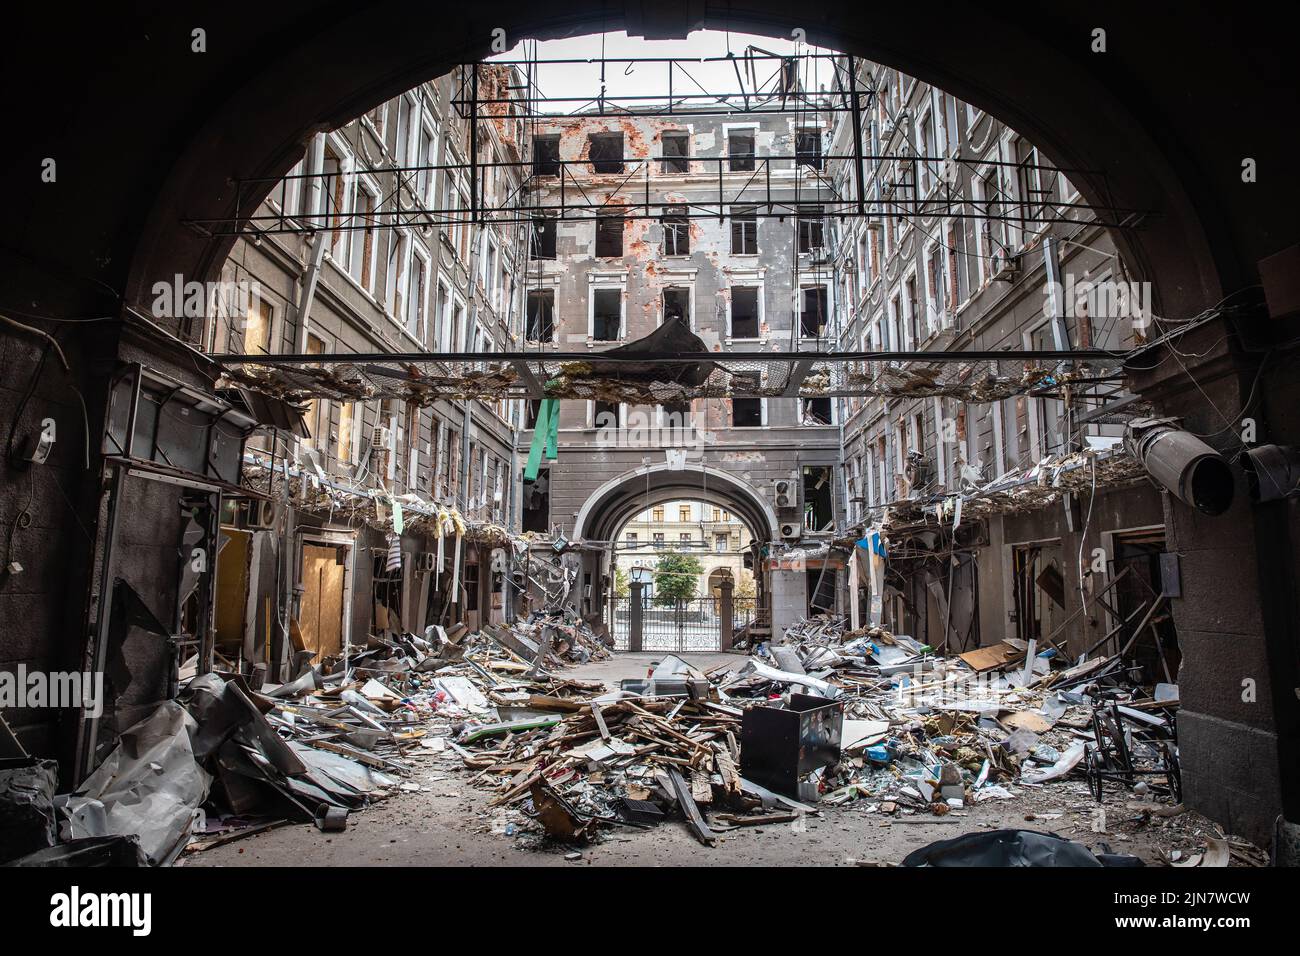 The wreckage of the building and damaged household items in the courtyard. Destroyed building in historical downtown in Kharkiv, Ukraine - 1 Aug 2022 Stock Photo